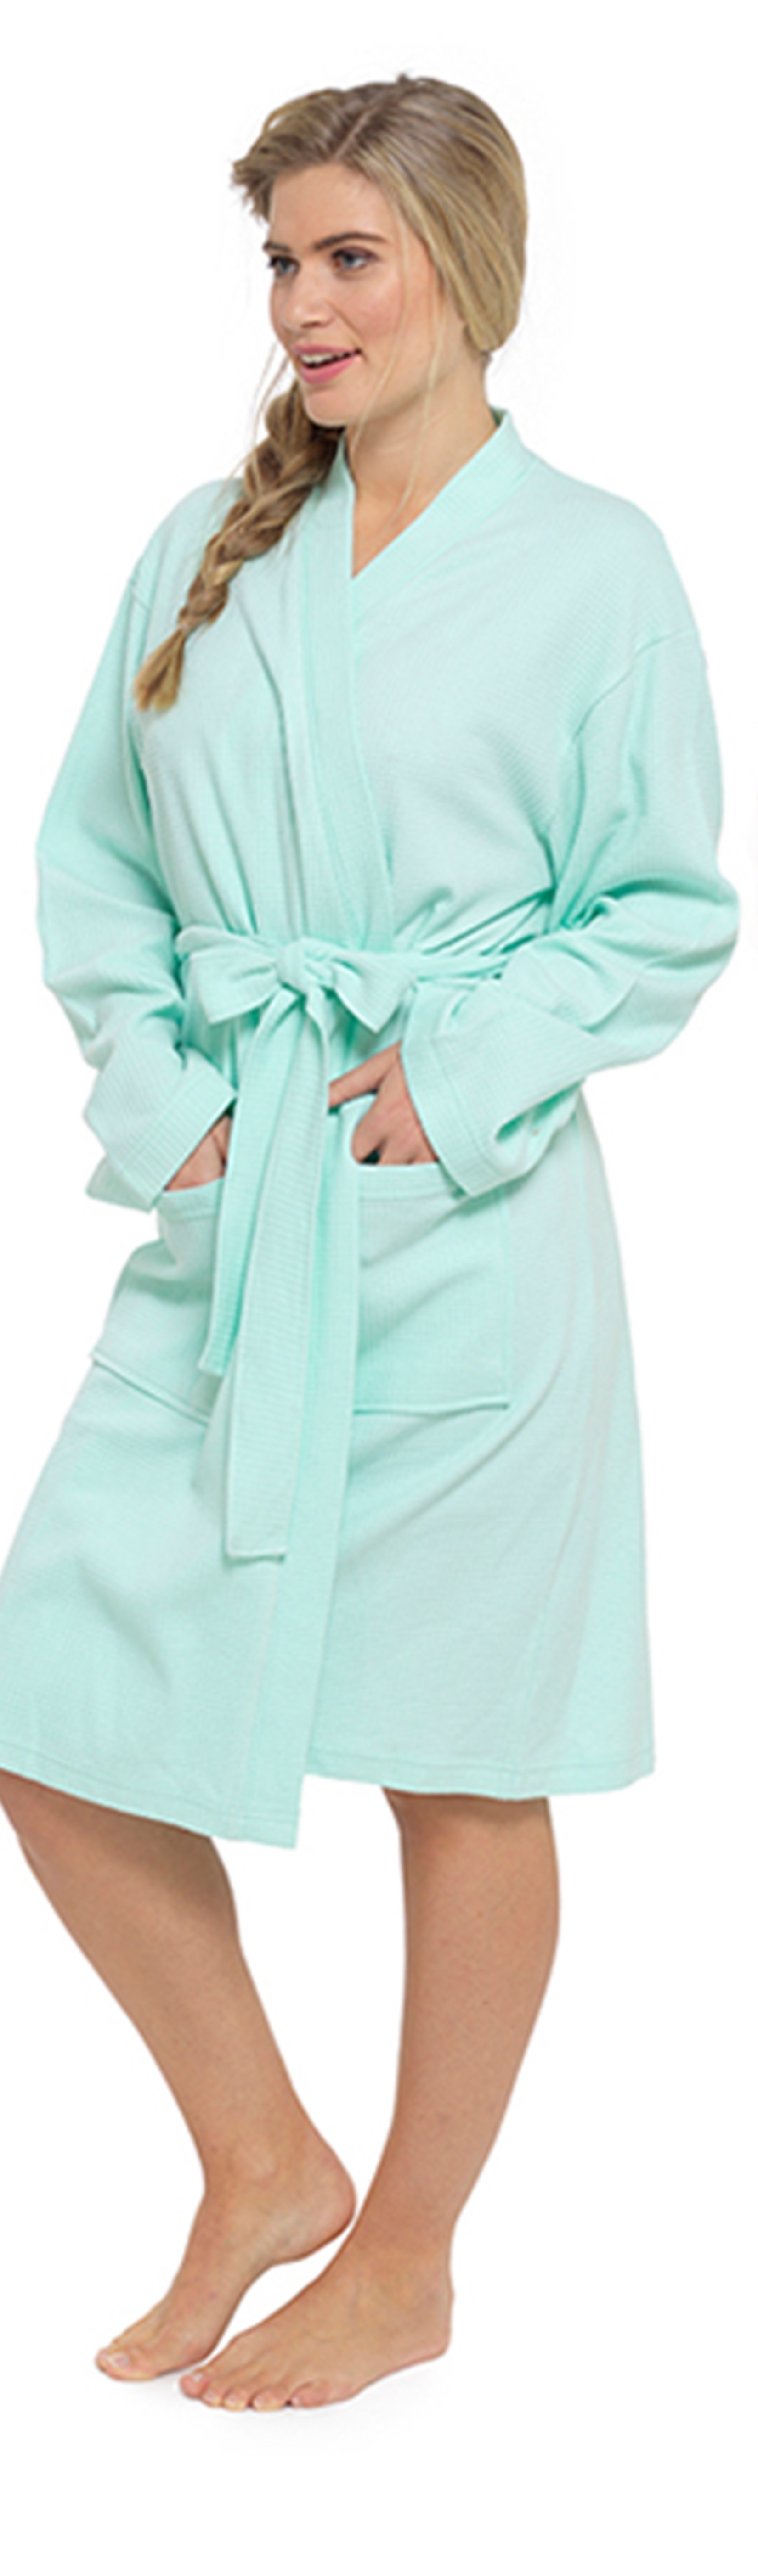 Ladies Waffle Dressing Gown Mint LN560A.jpg  by Thingimijigs